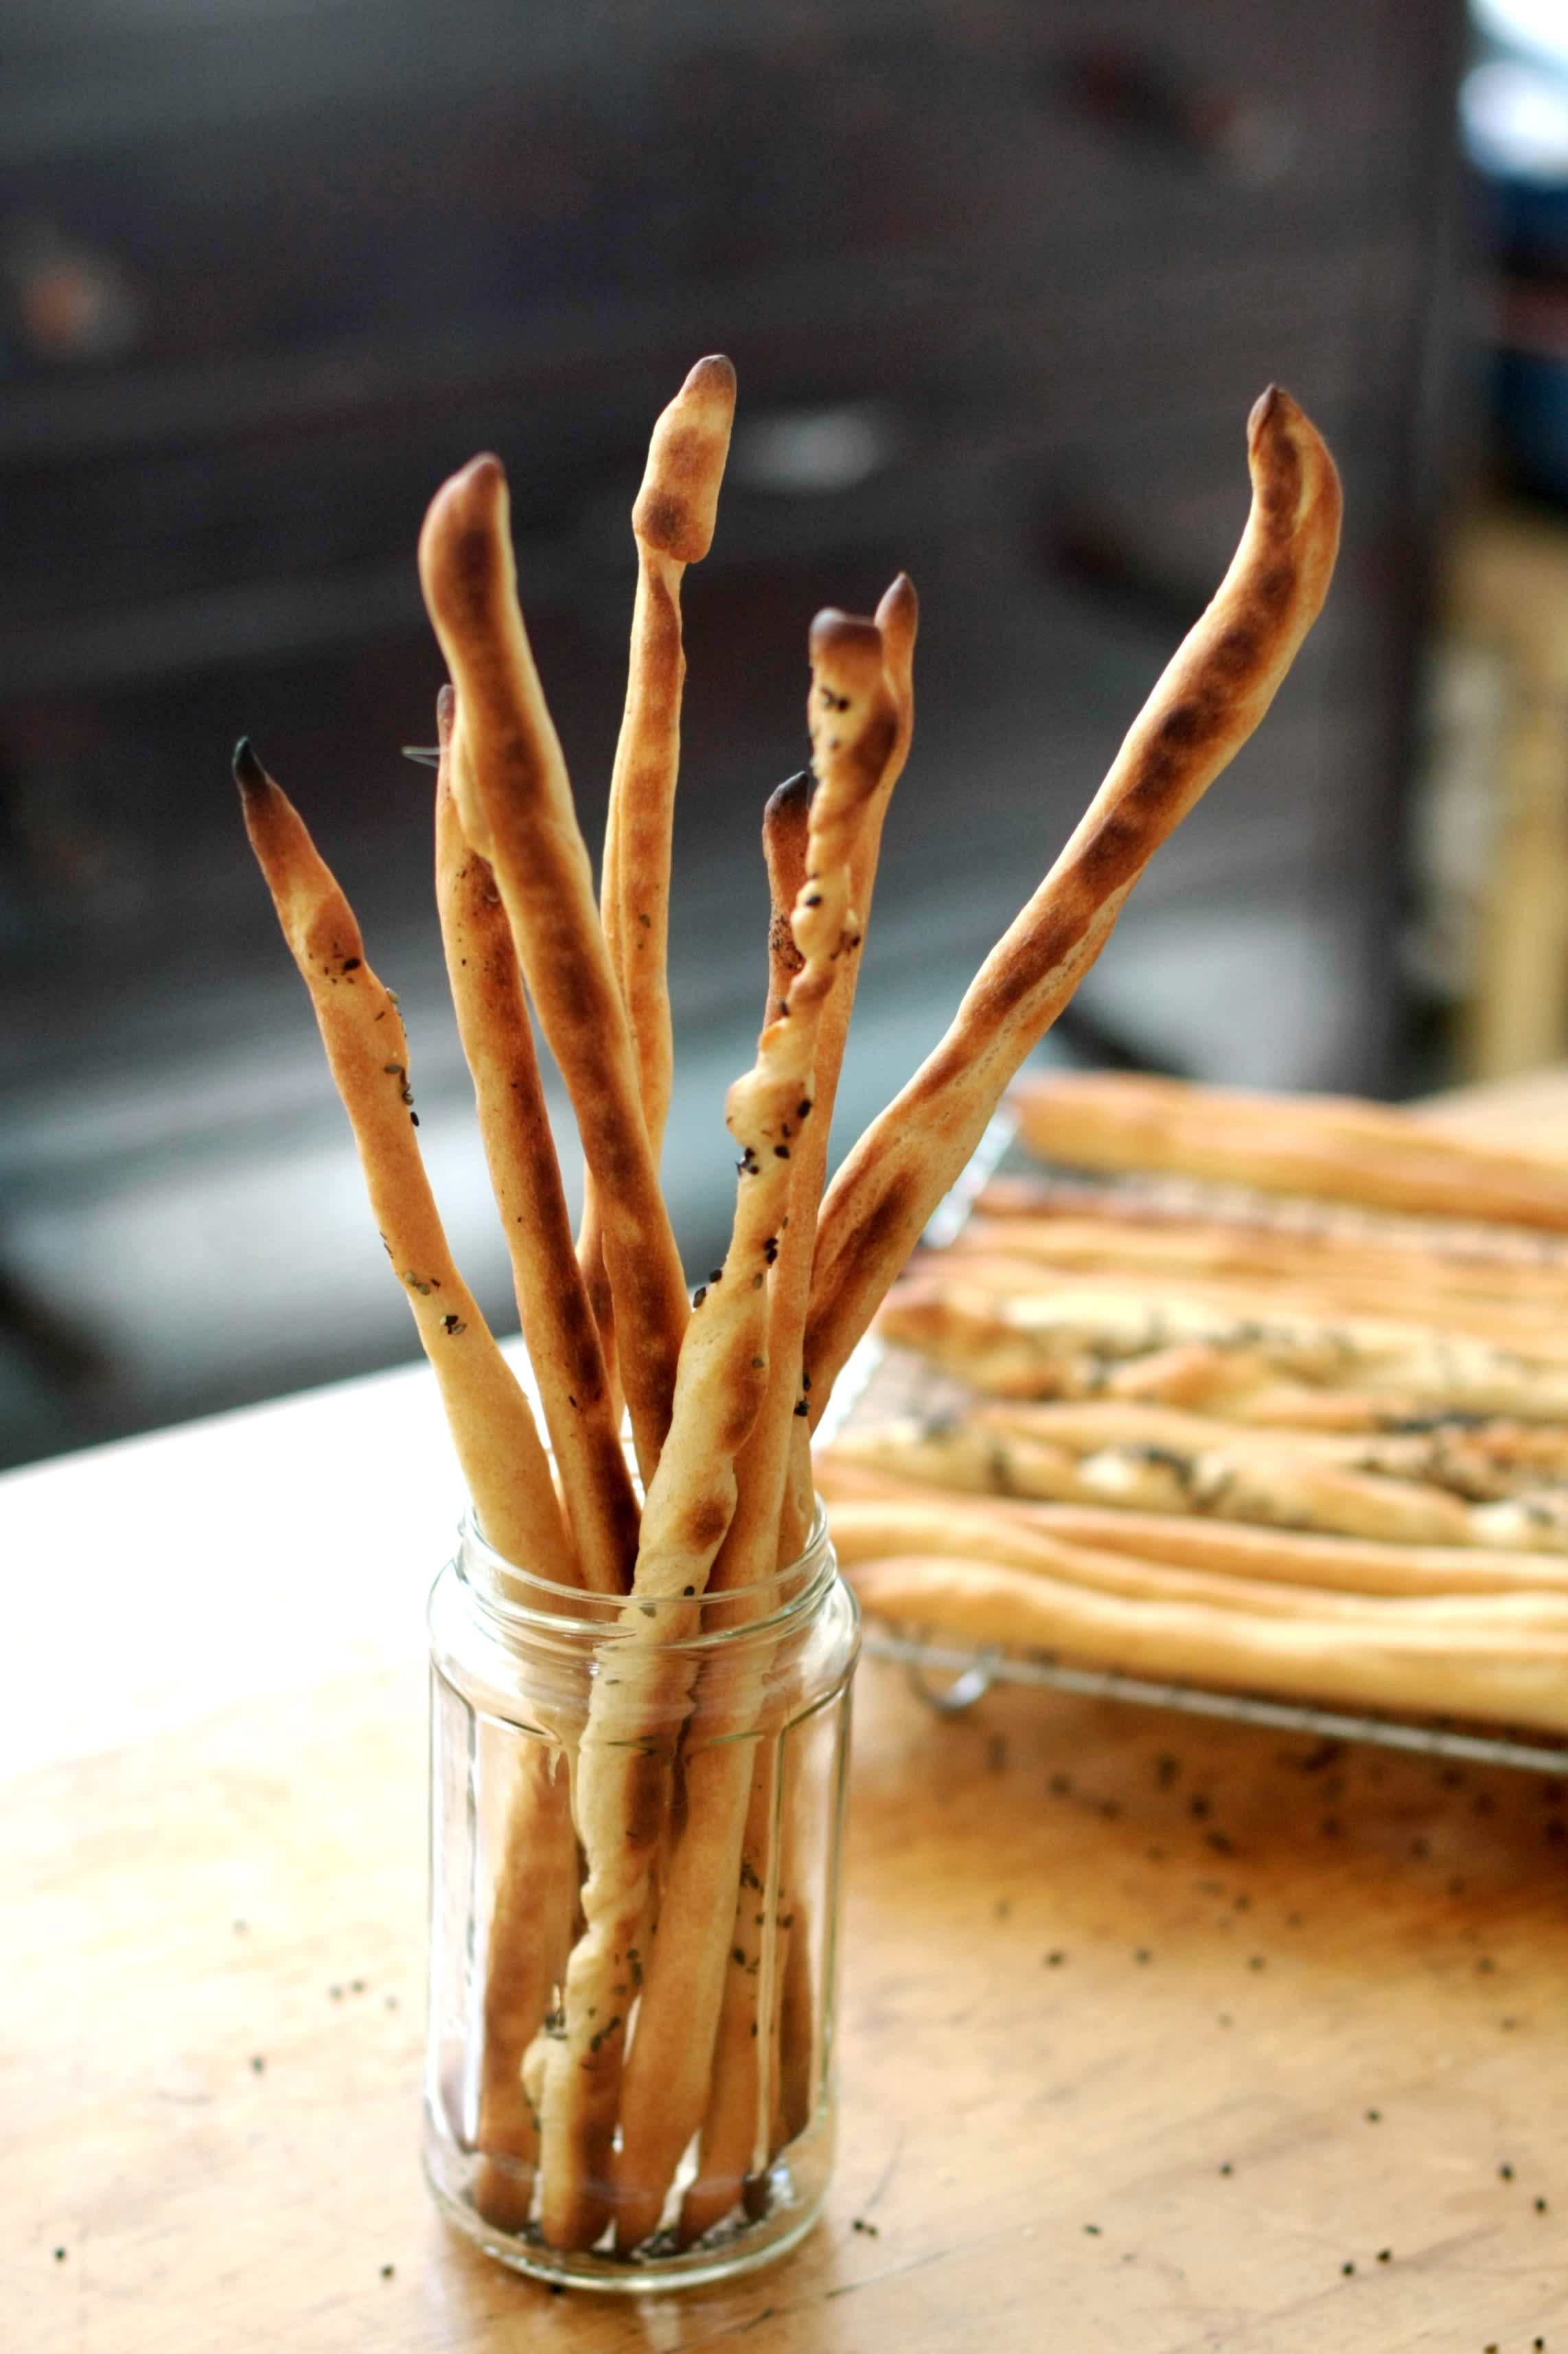 Grissini Breadsticks Recipe (With Fresh Herbs) | The Kitchn